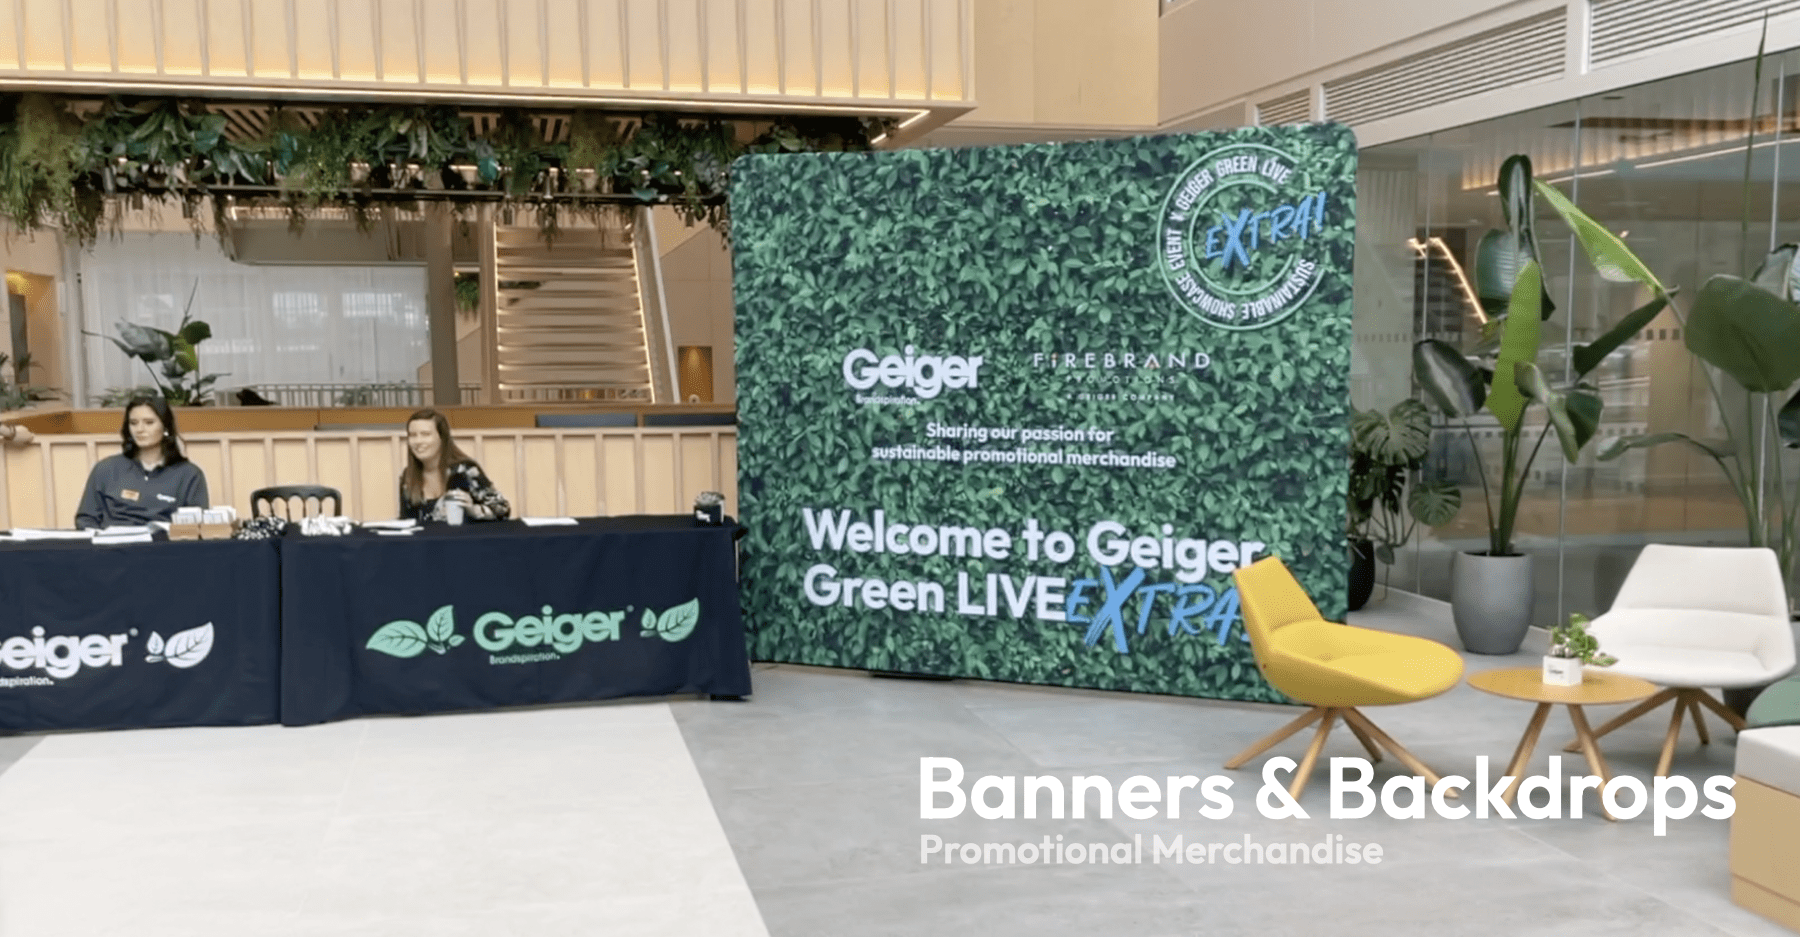 Branded Banners, Backdrops and Event Props from geiger promotional merchandise